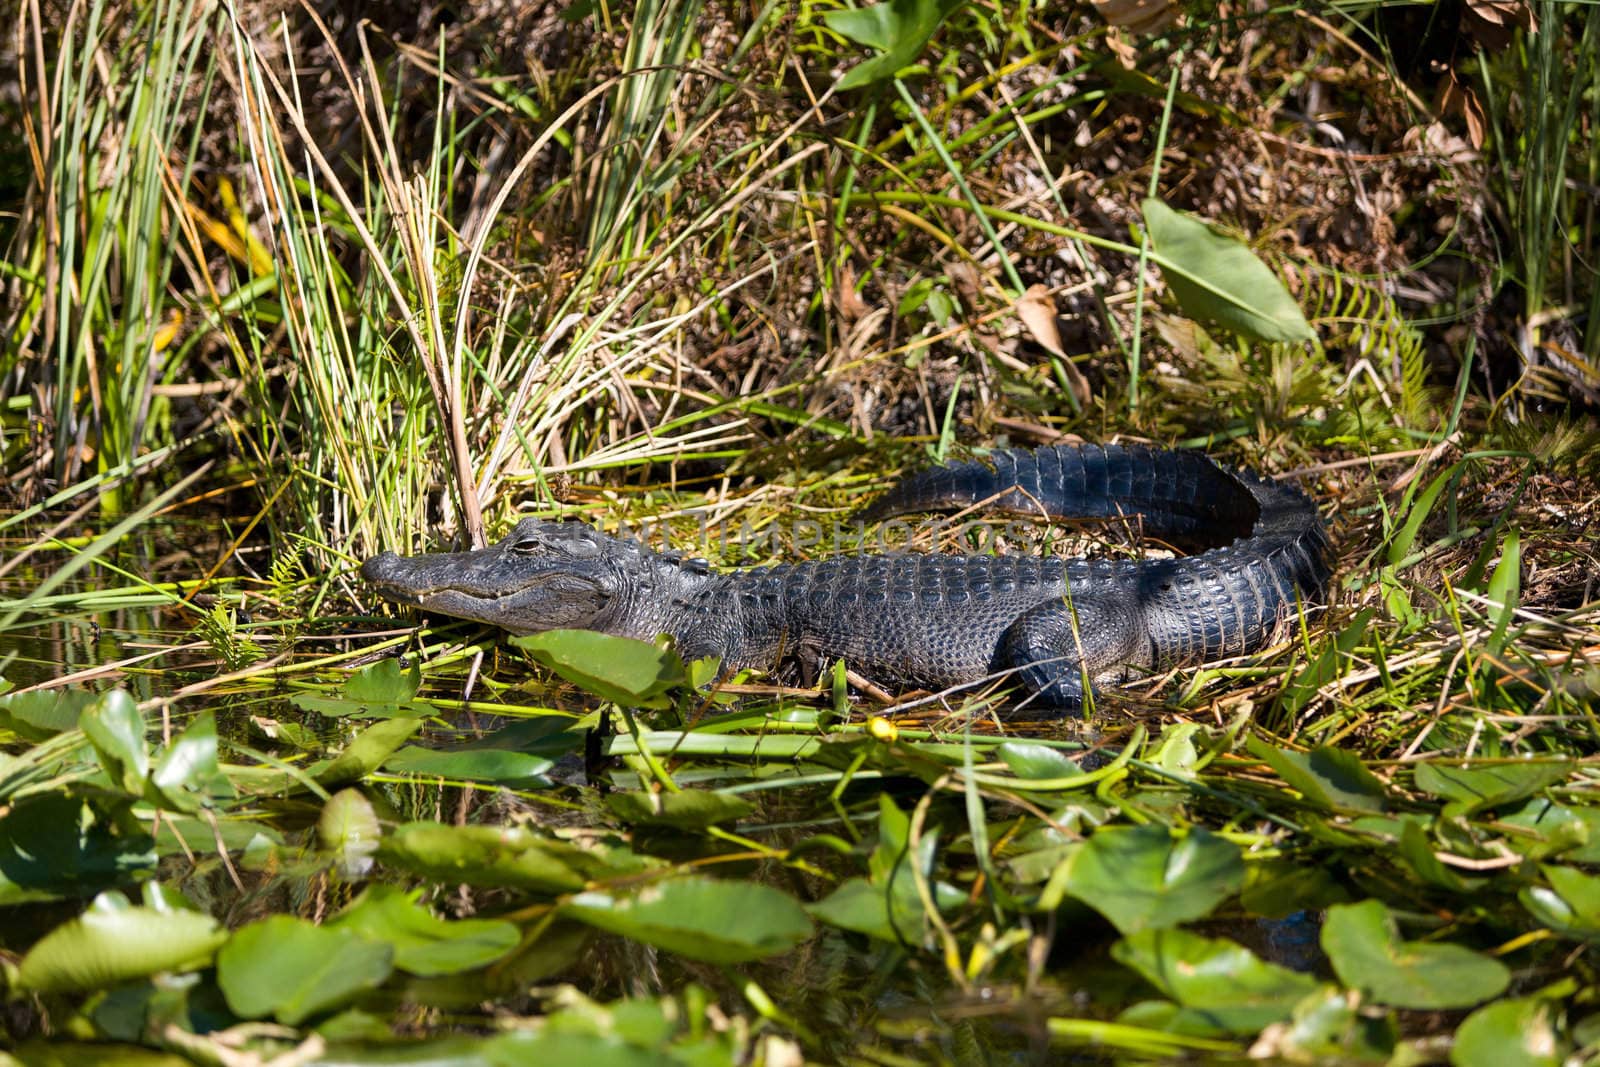 An alligator resting in the swamp of the Everglades National Park in Florida